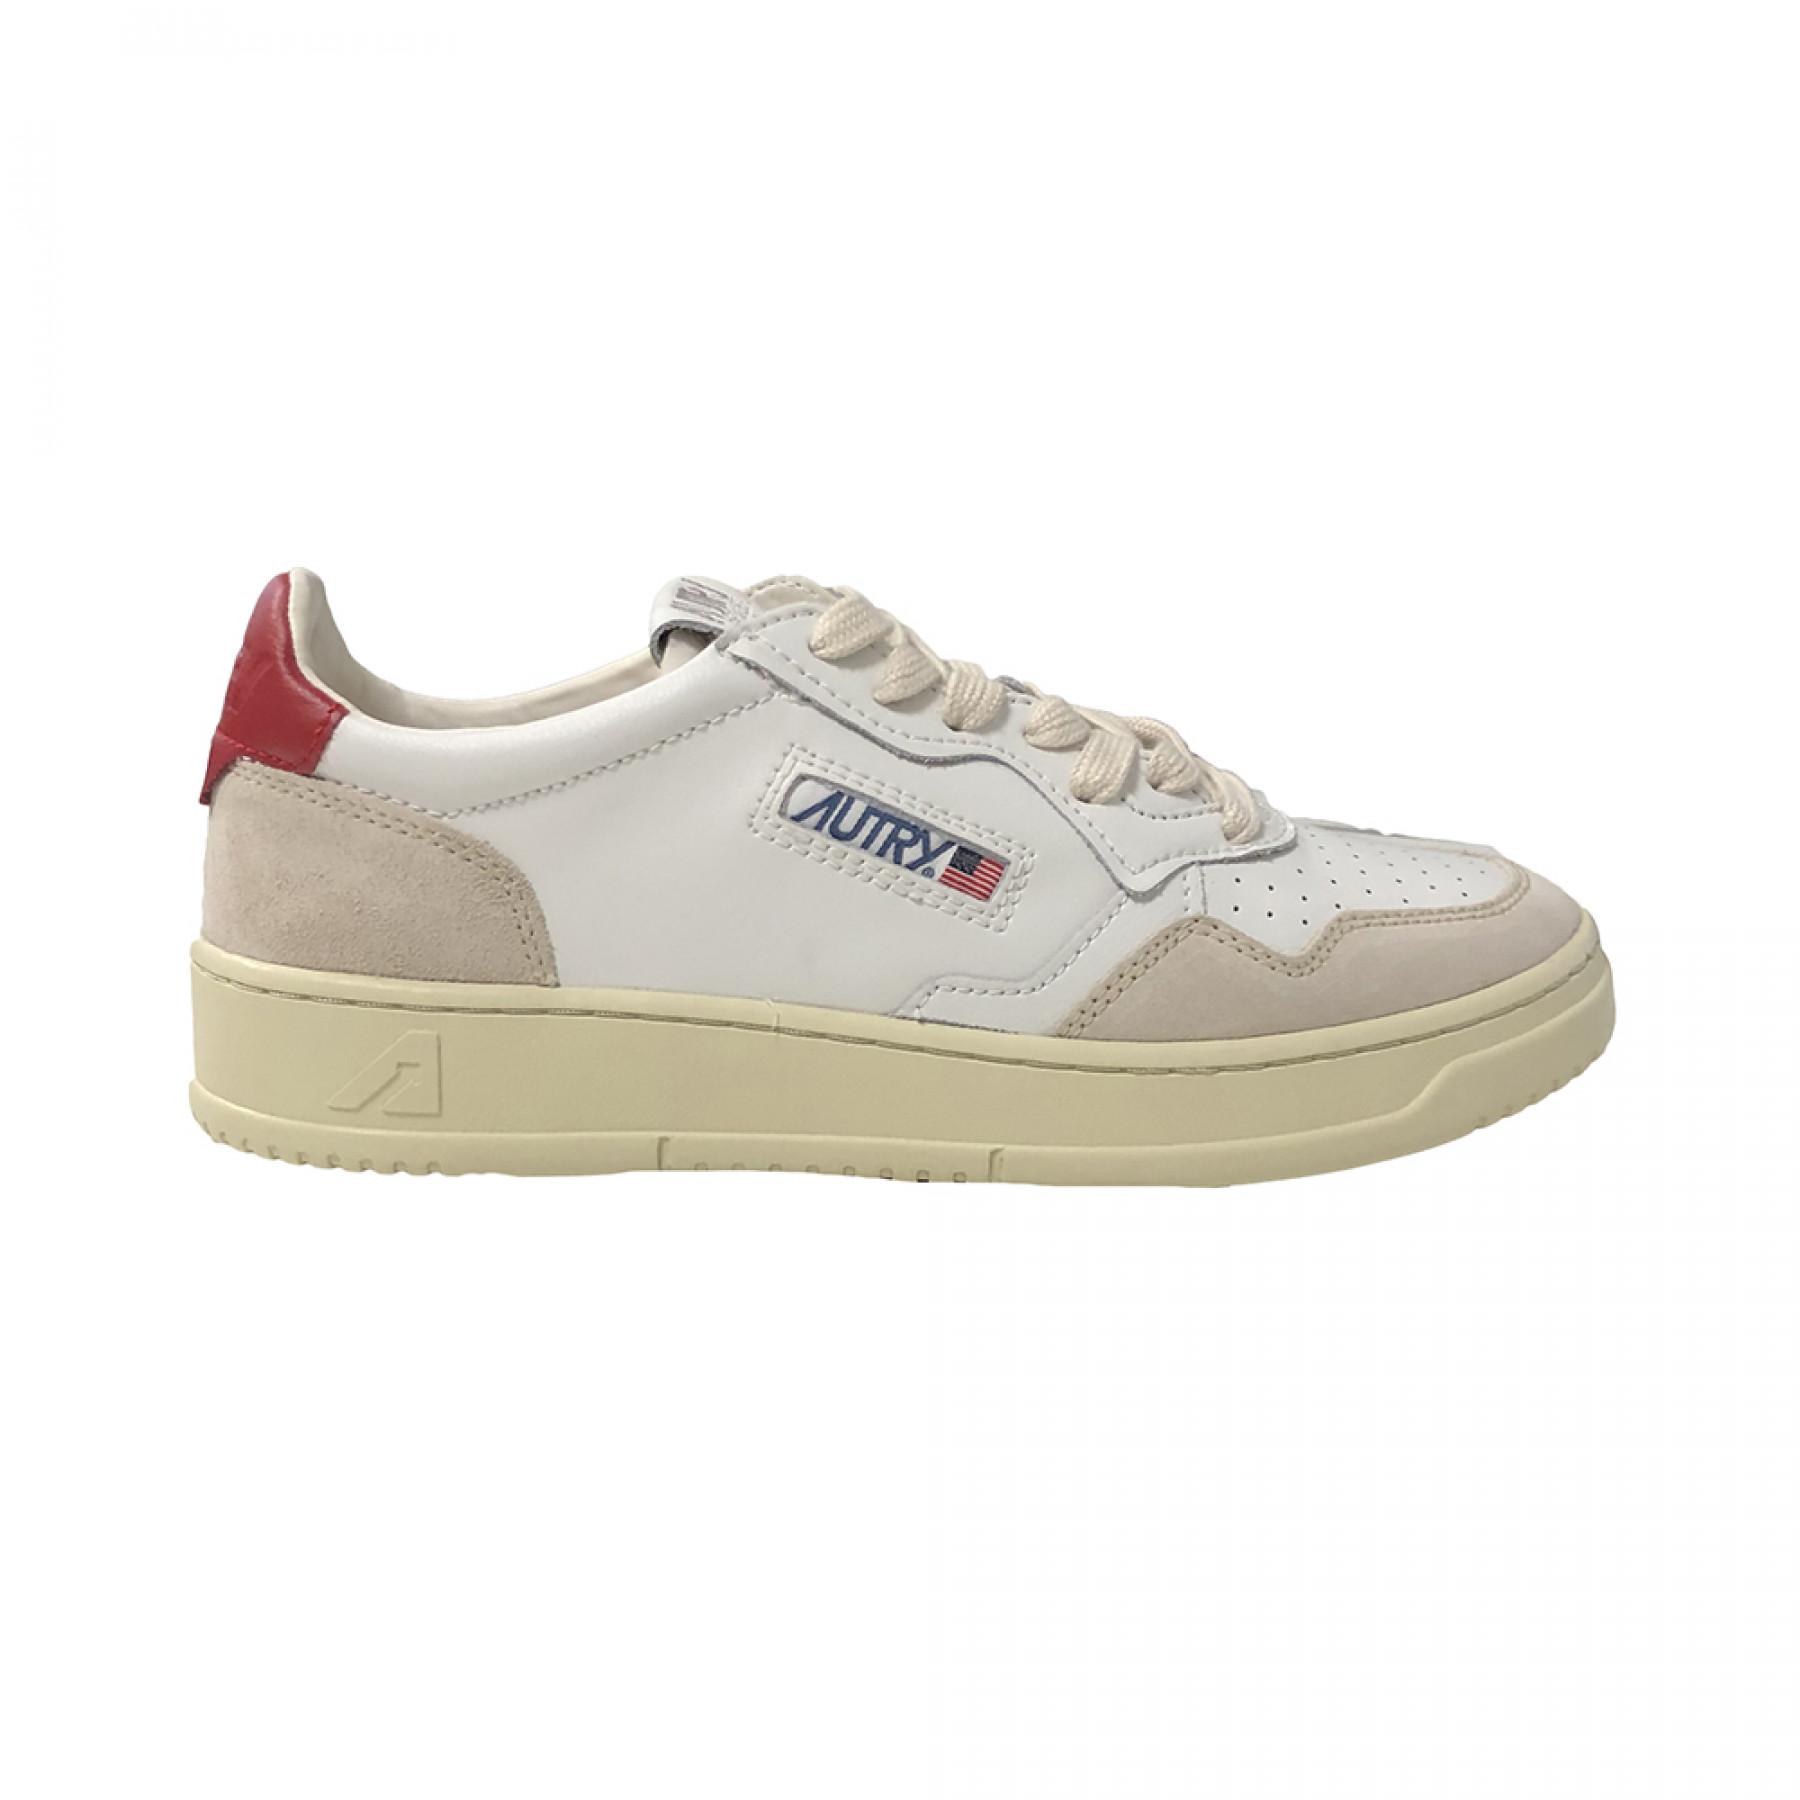 Sneakers Autry Medalist LS29 Leather/Suede White/Red